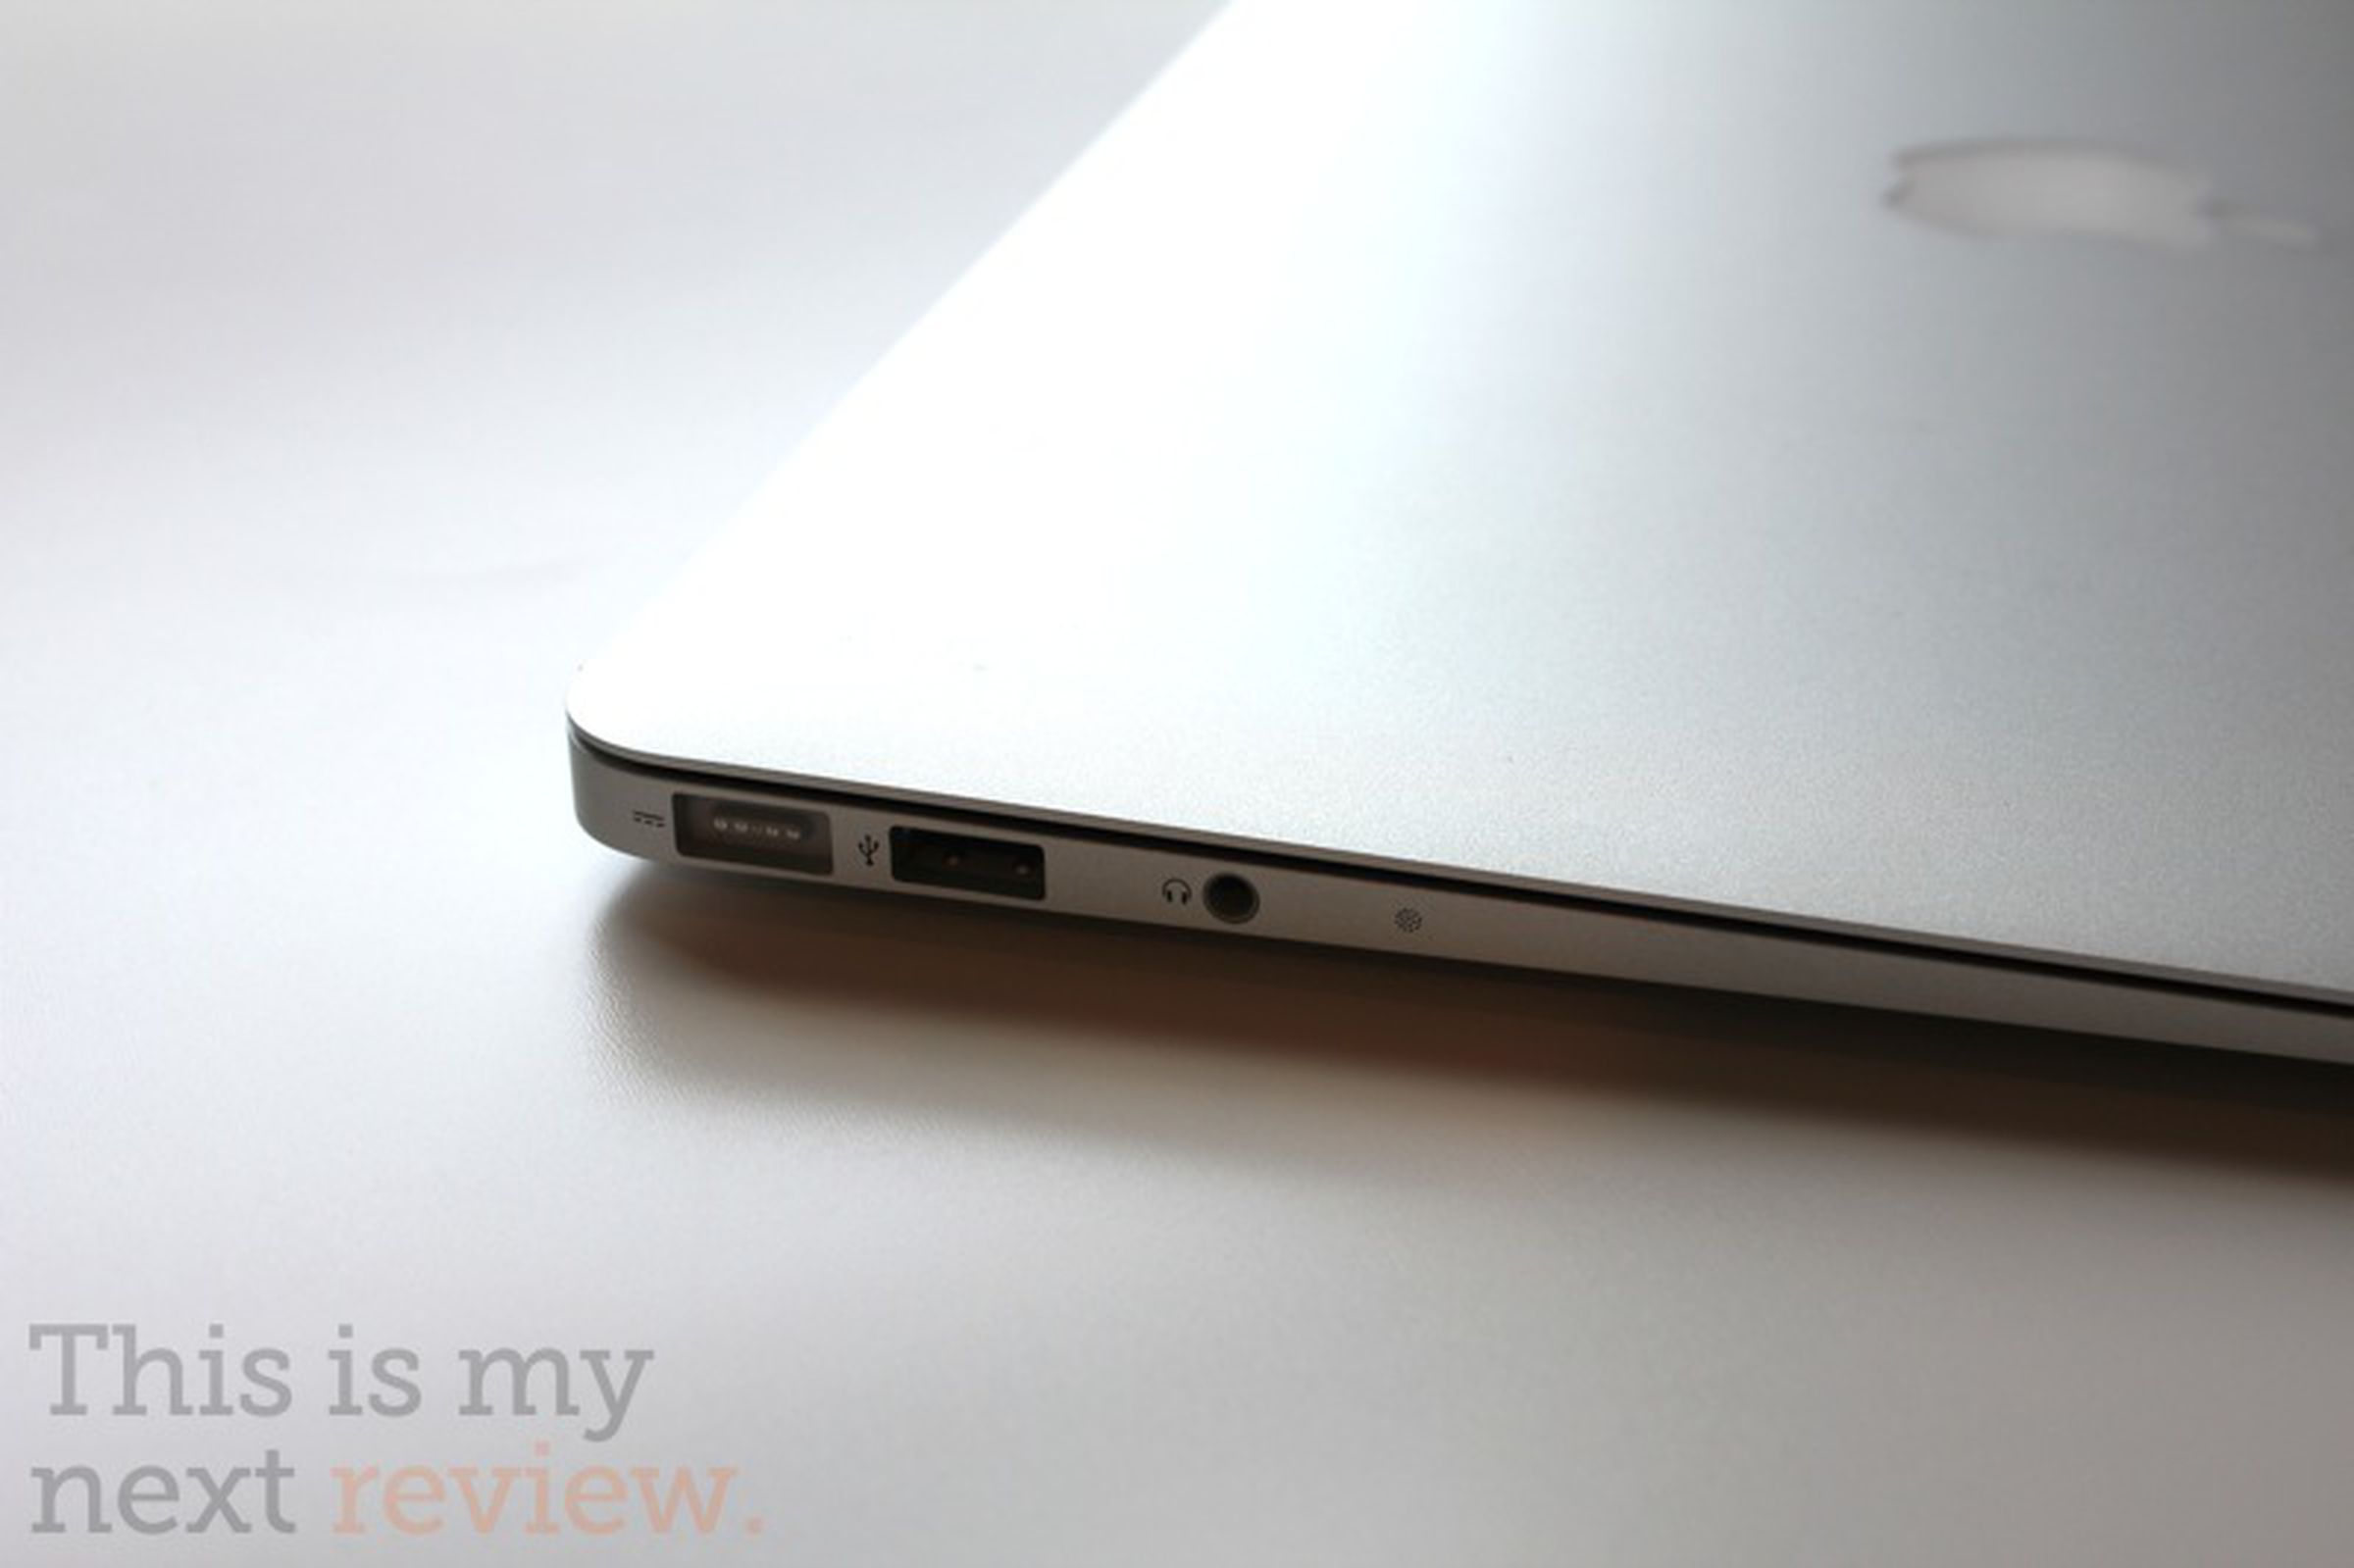 Apple MacBook Air review pictures (13-inch, mid 2011)